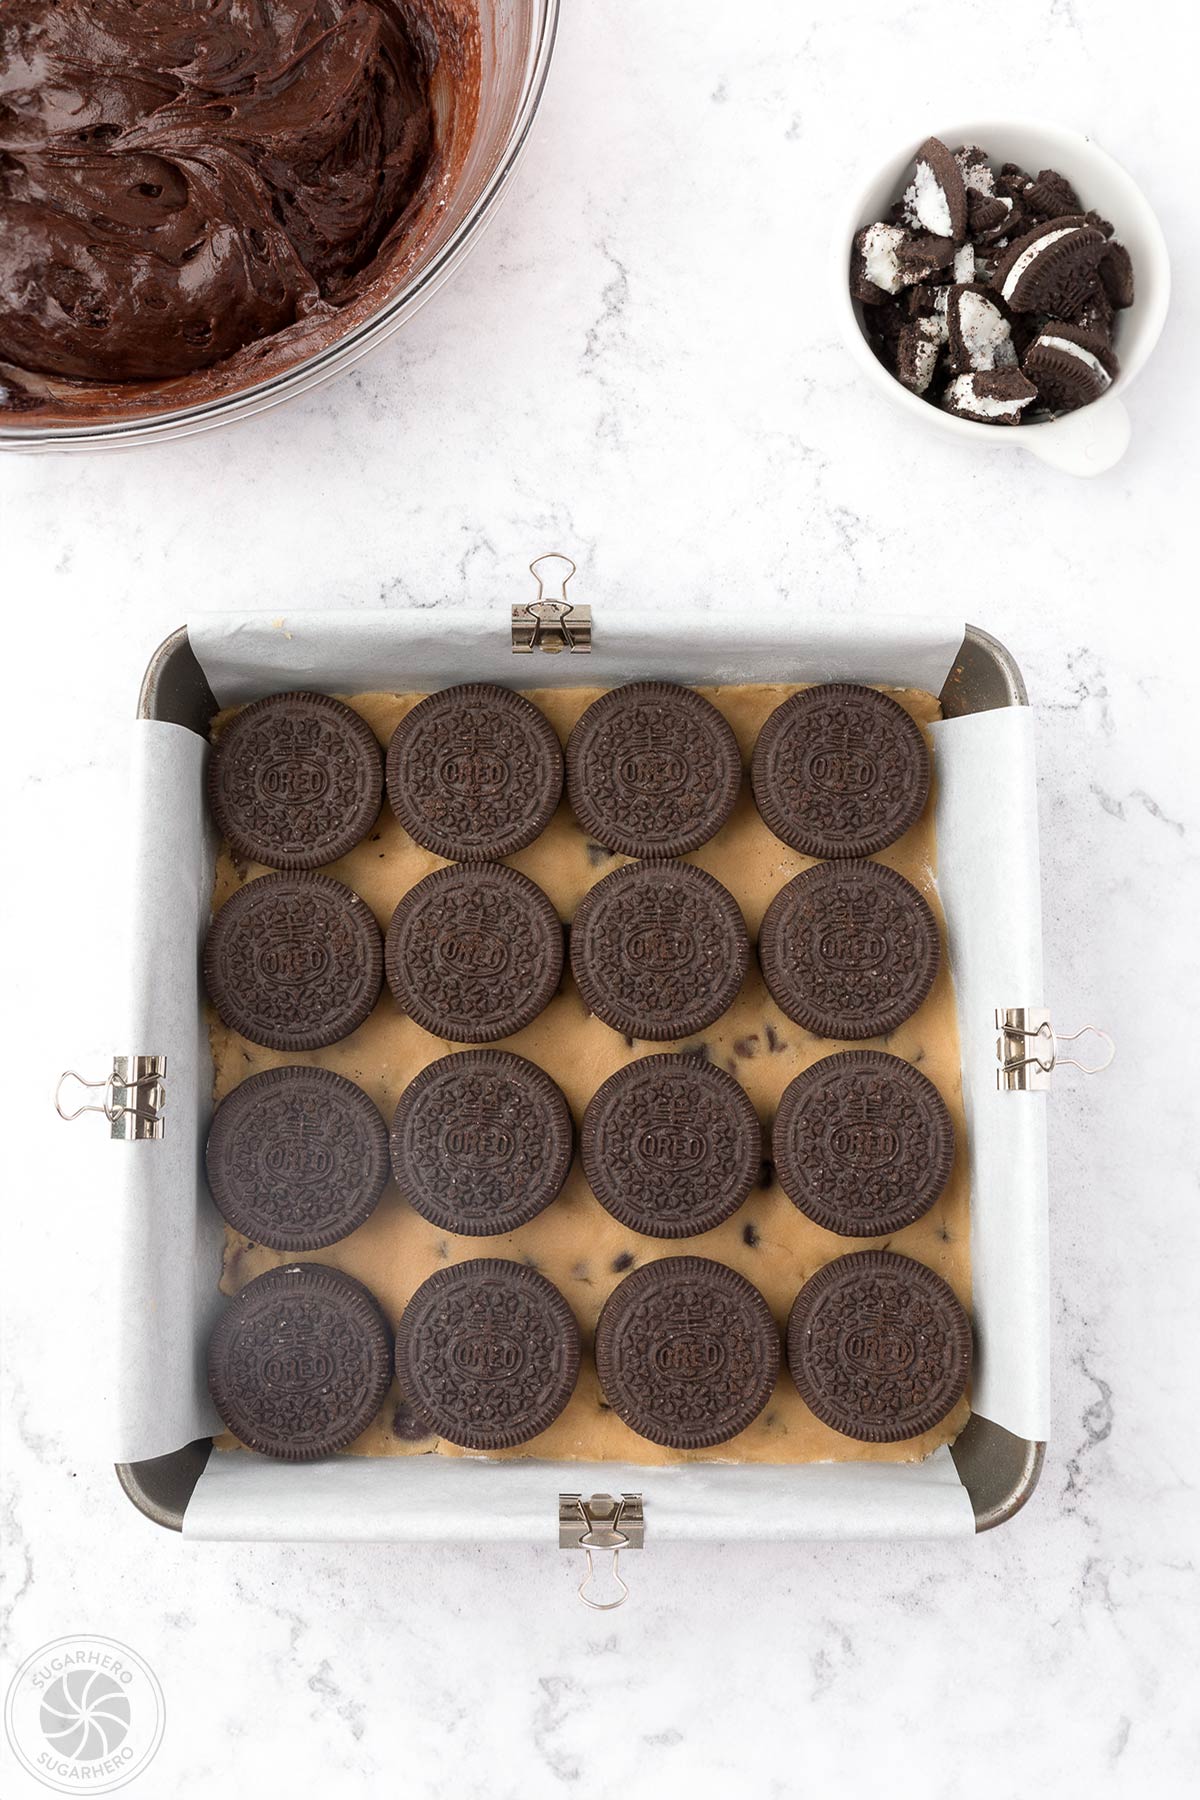 Rows of Oreos layered on top of chocolate chip cookie dough in a square pan.